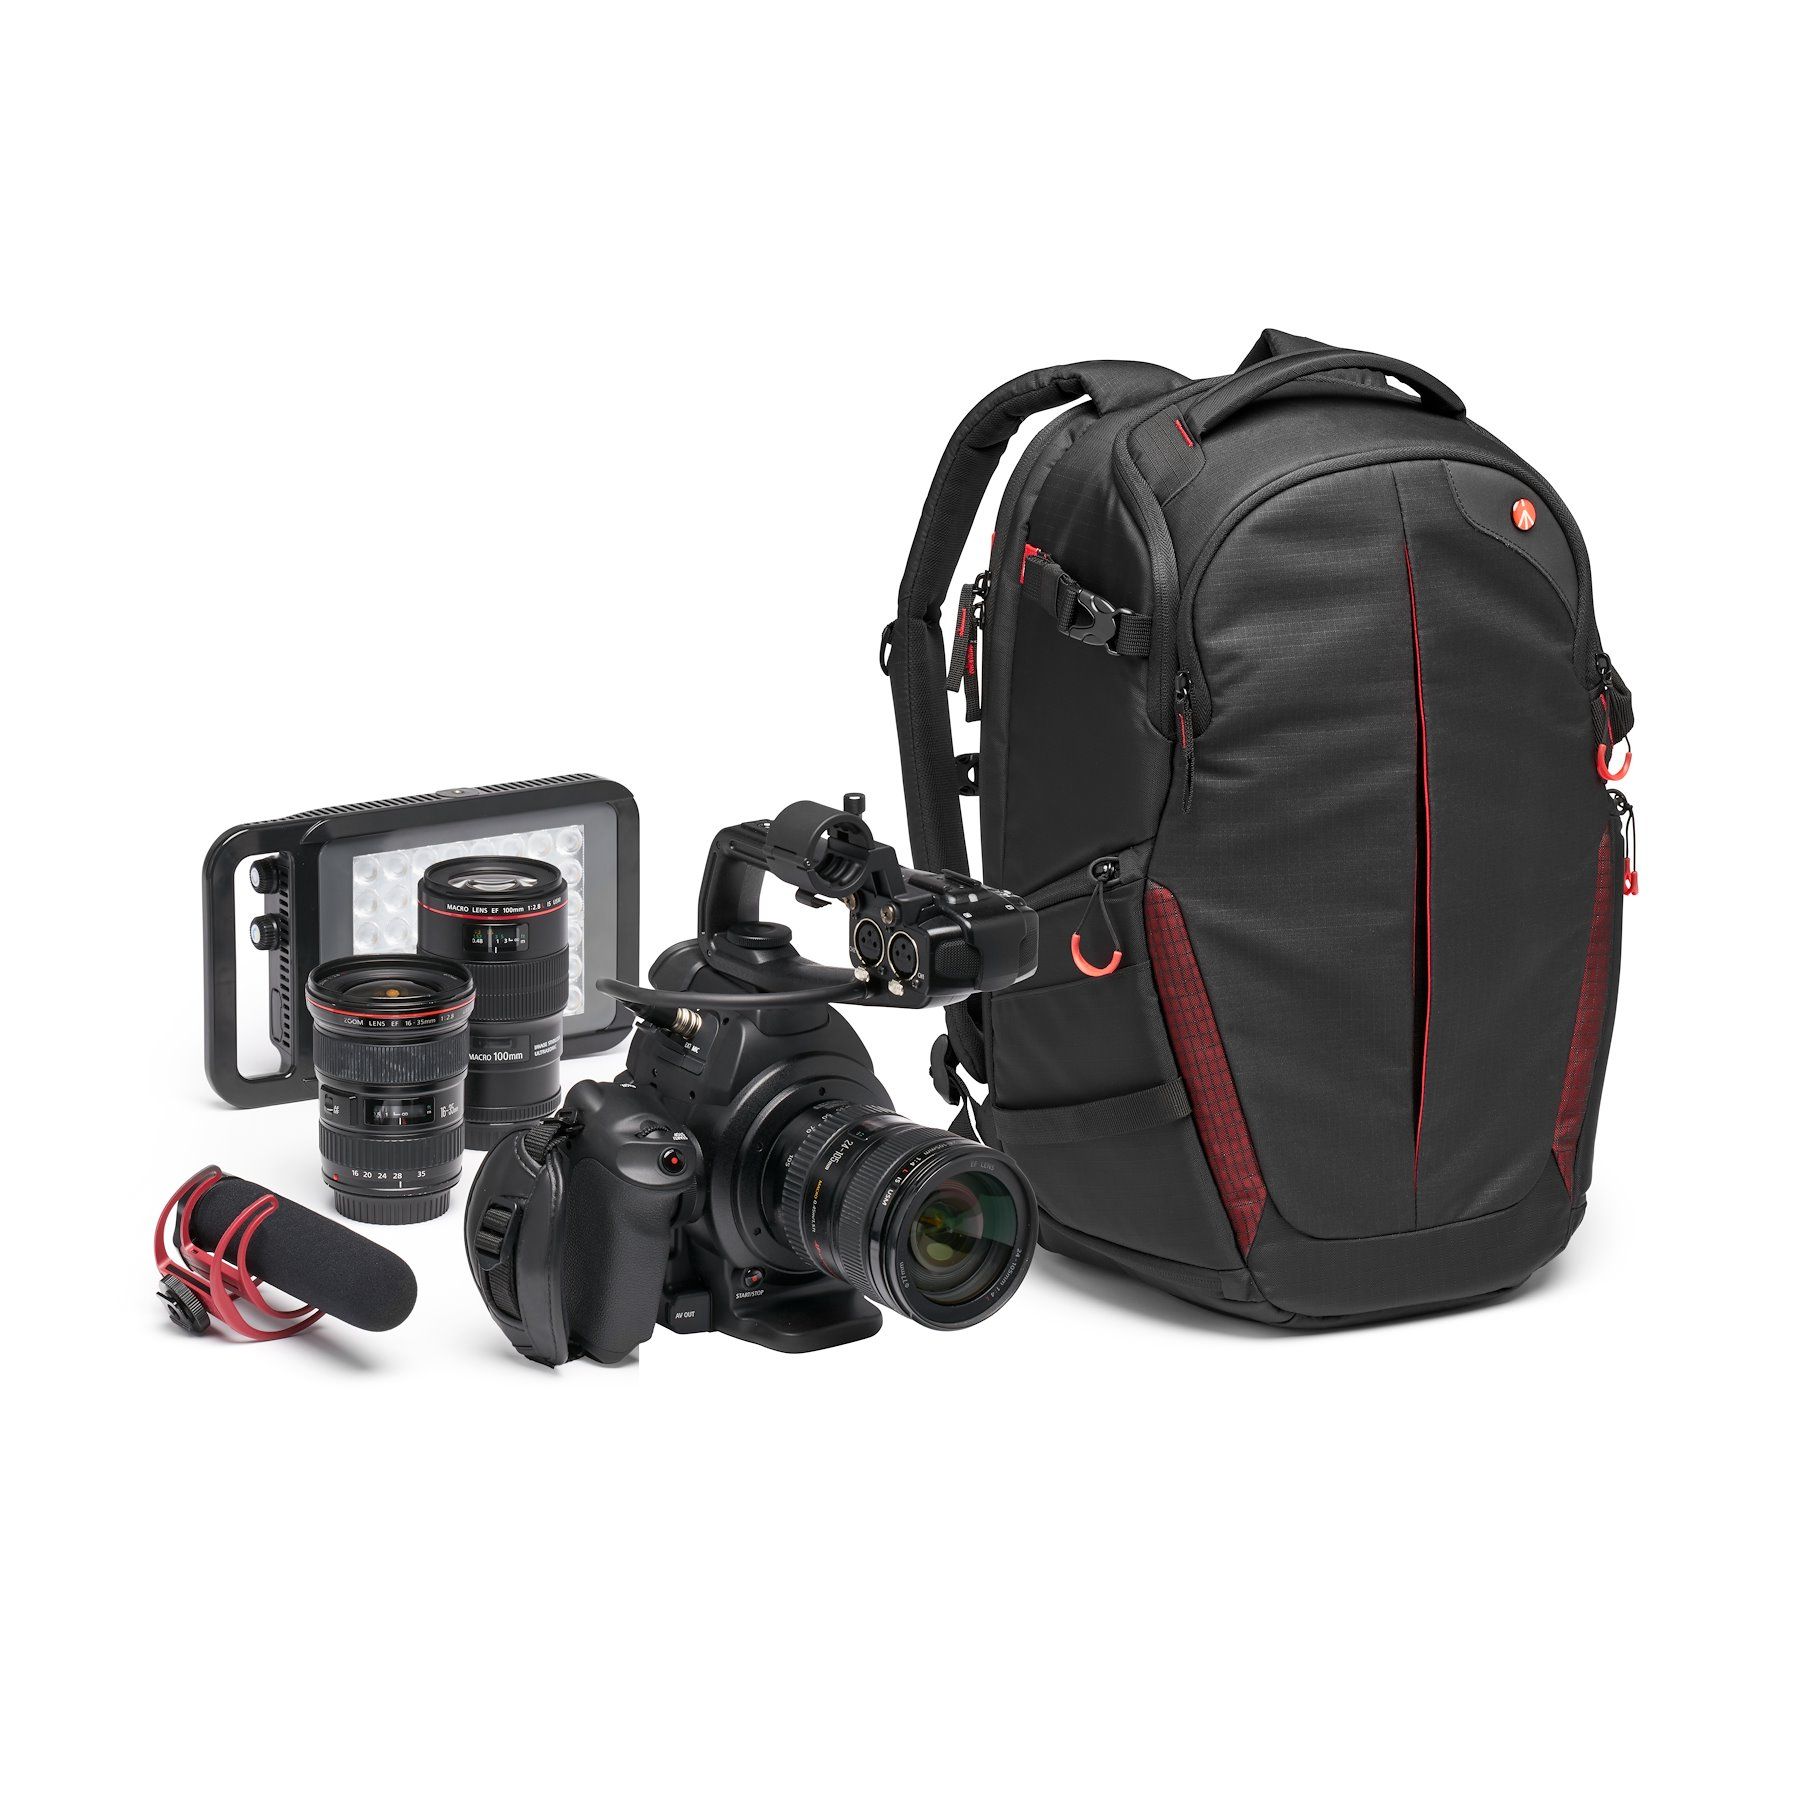 Manfrotto Pro Light backpack RedBee-310 for DSLR/c 